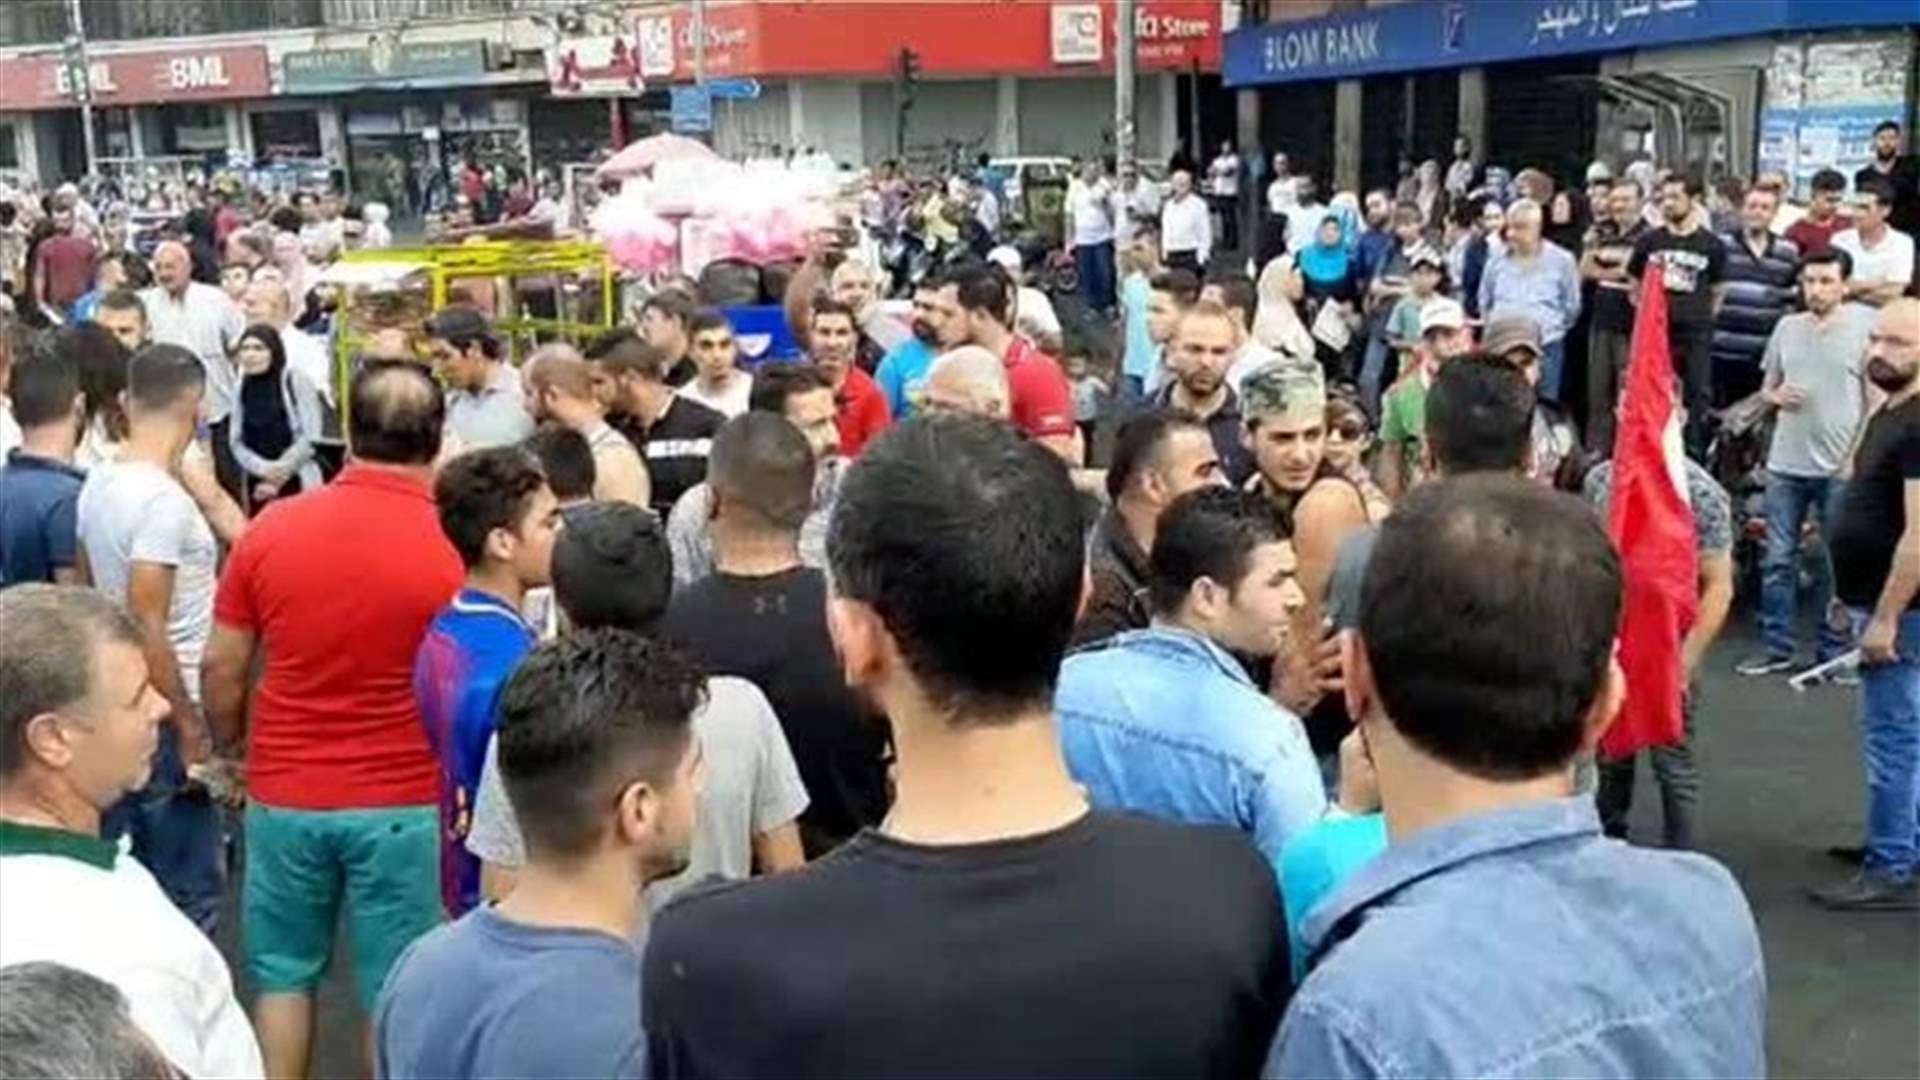 Clash in Tripoli after one protester raised Turkish flag (Video)